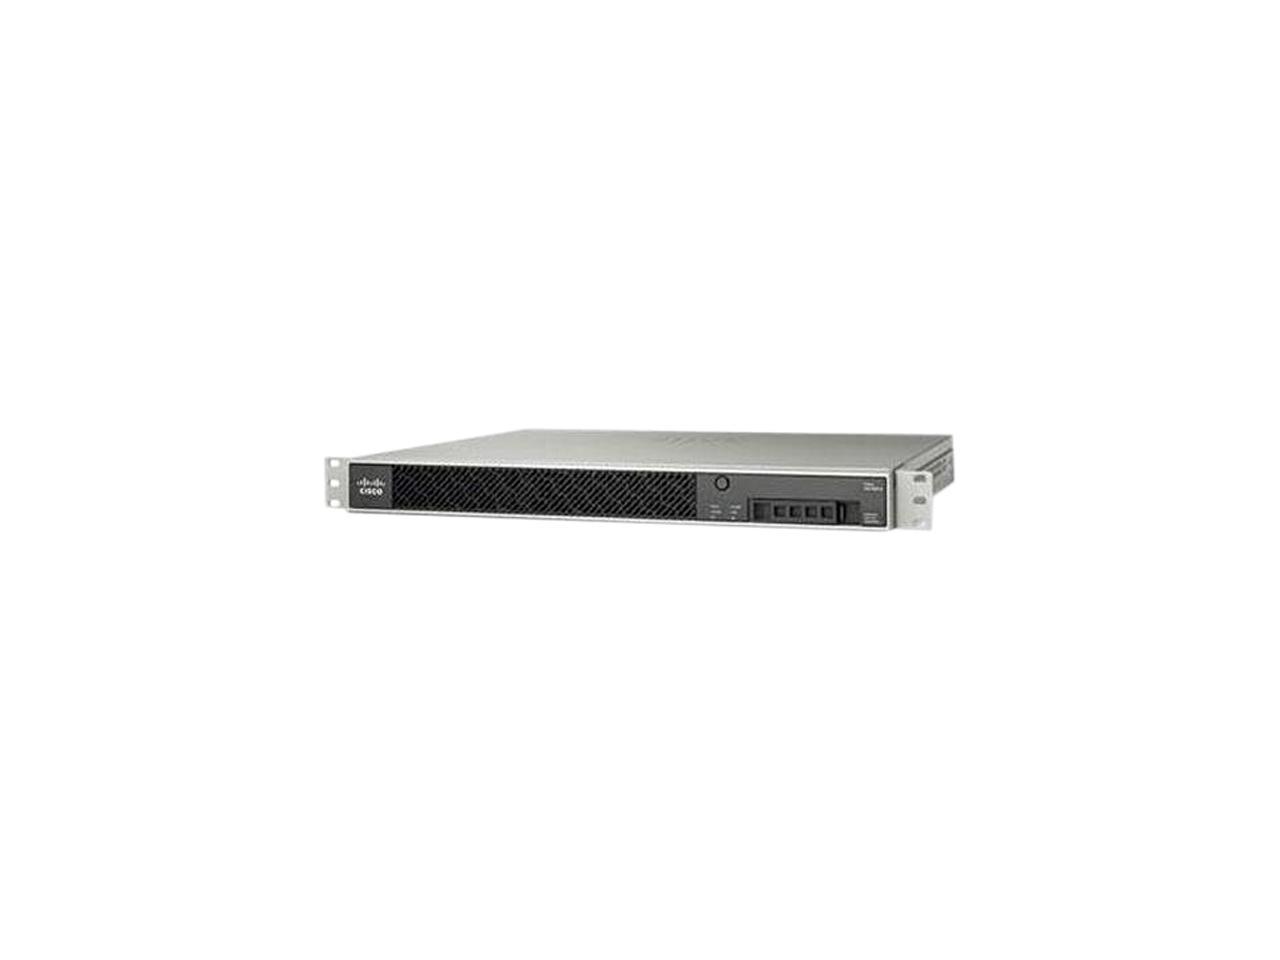 Cisco ASA 5525-X with FirePOWER Services, 8GE data, AC, 3DES/AES, SSD